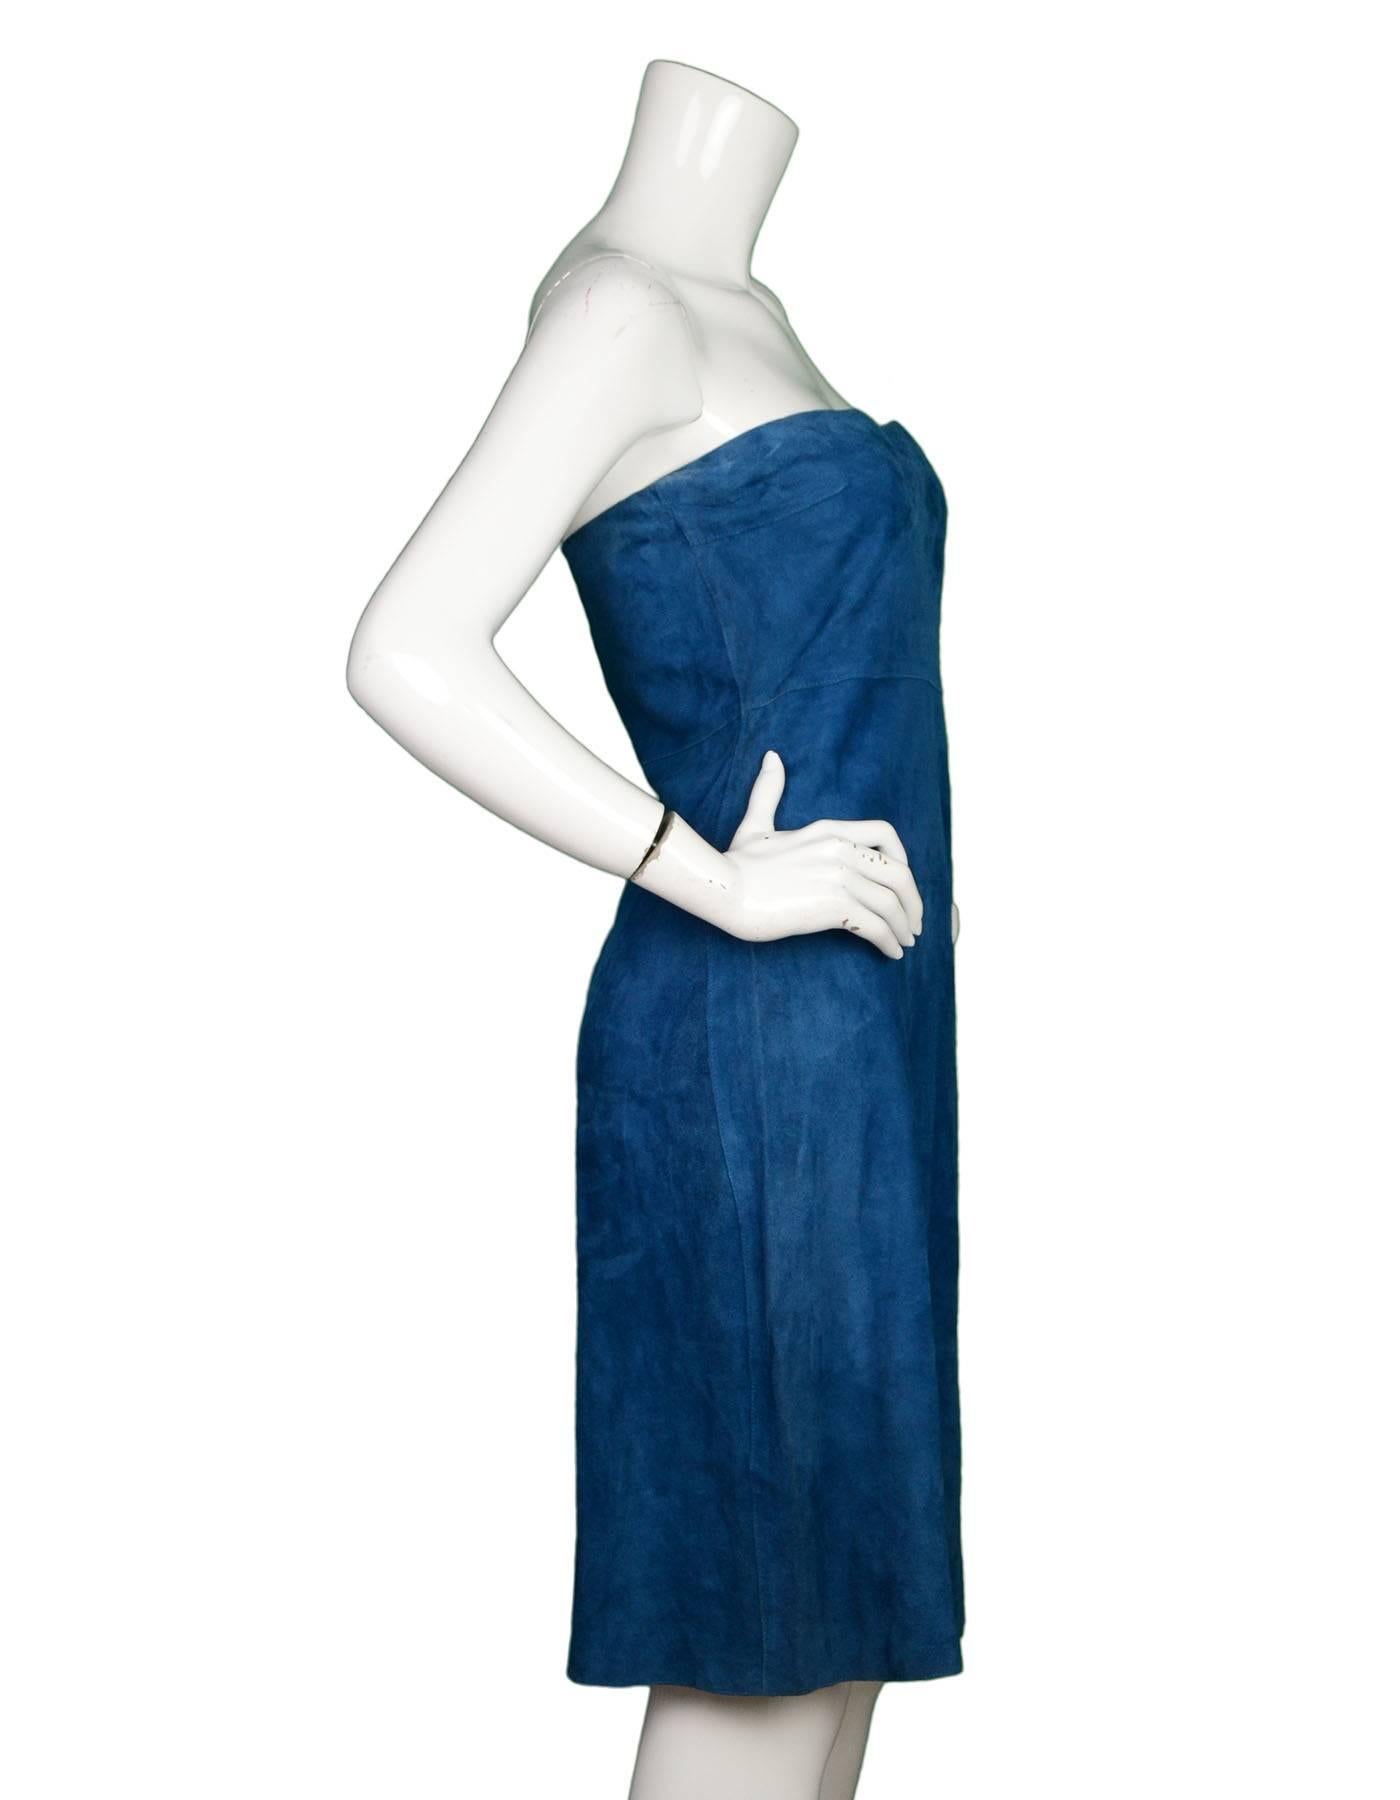 Tahari Blue Suede Strapless Dress

Made In: China
Color: Aqua blue
Composition: 100% leather
Lining: None
Closure/Opening: Back center zipper
Exterior Pockets: None
Interior Pockets: None
Overall Condition: Excellent pre-owned condition